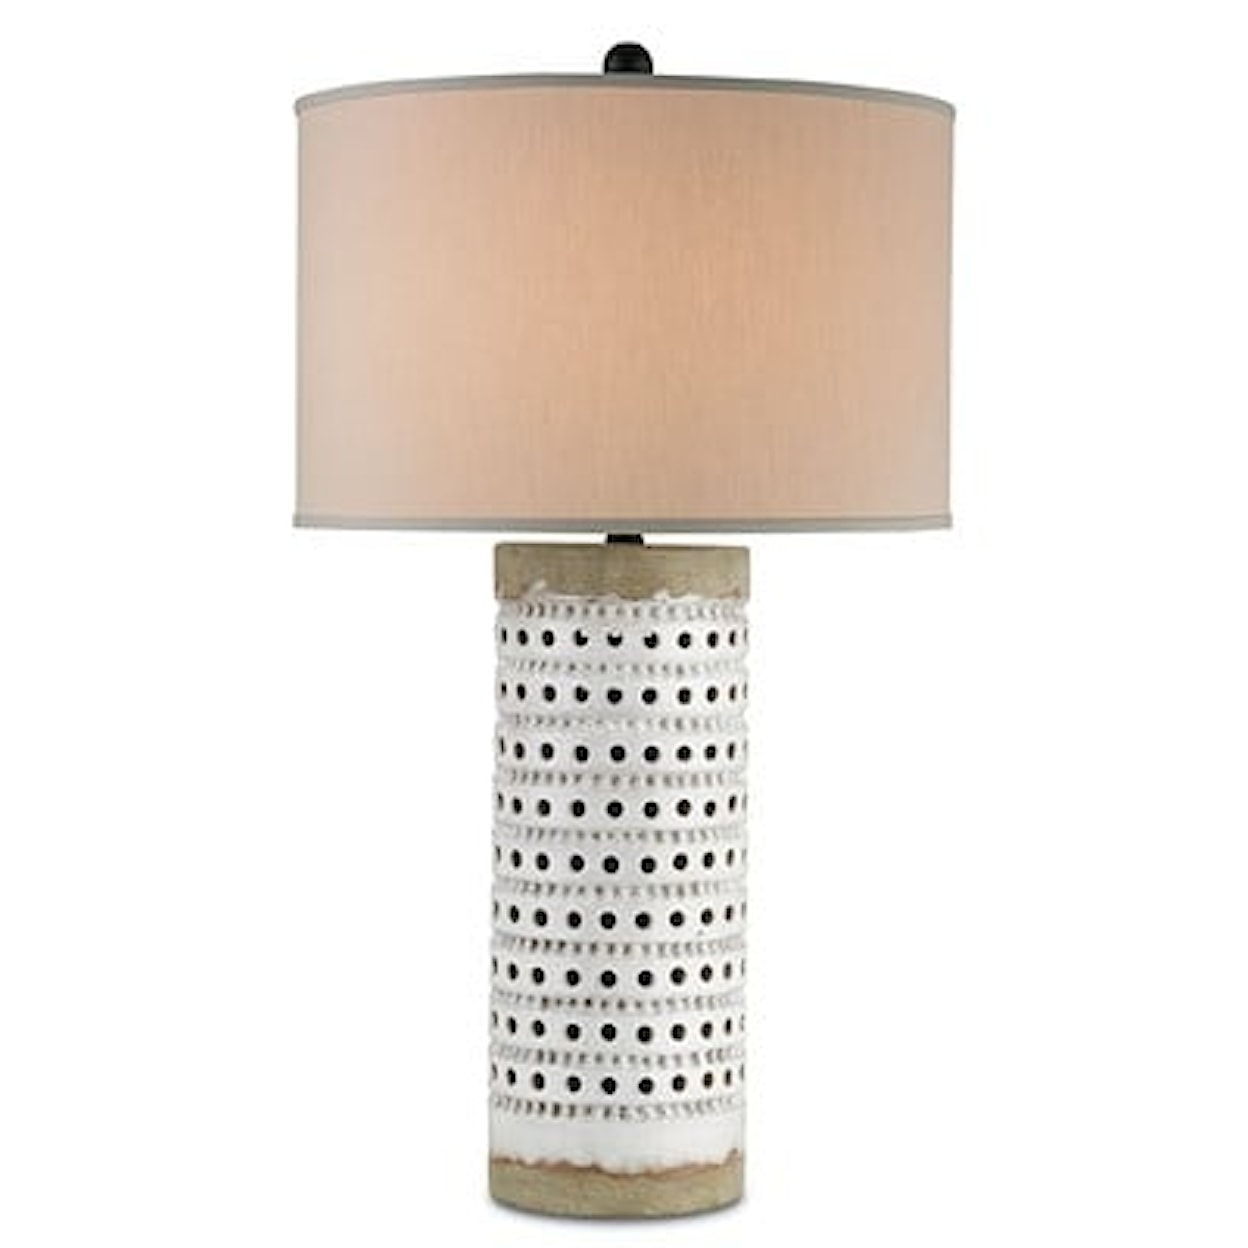 Currey & Co Lighting Table Lamps TERRACE TABLE LAMP